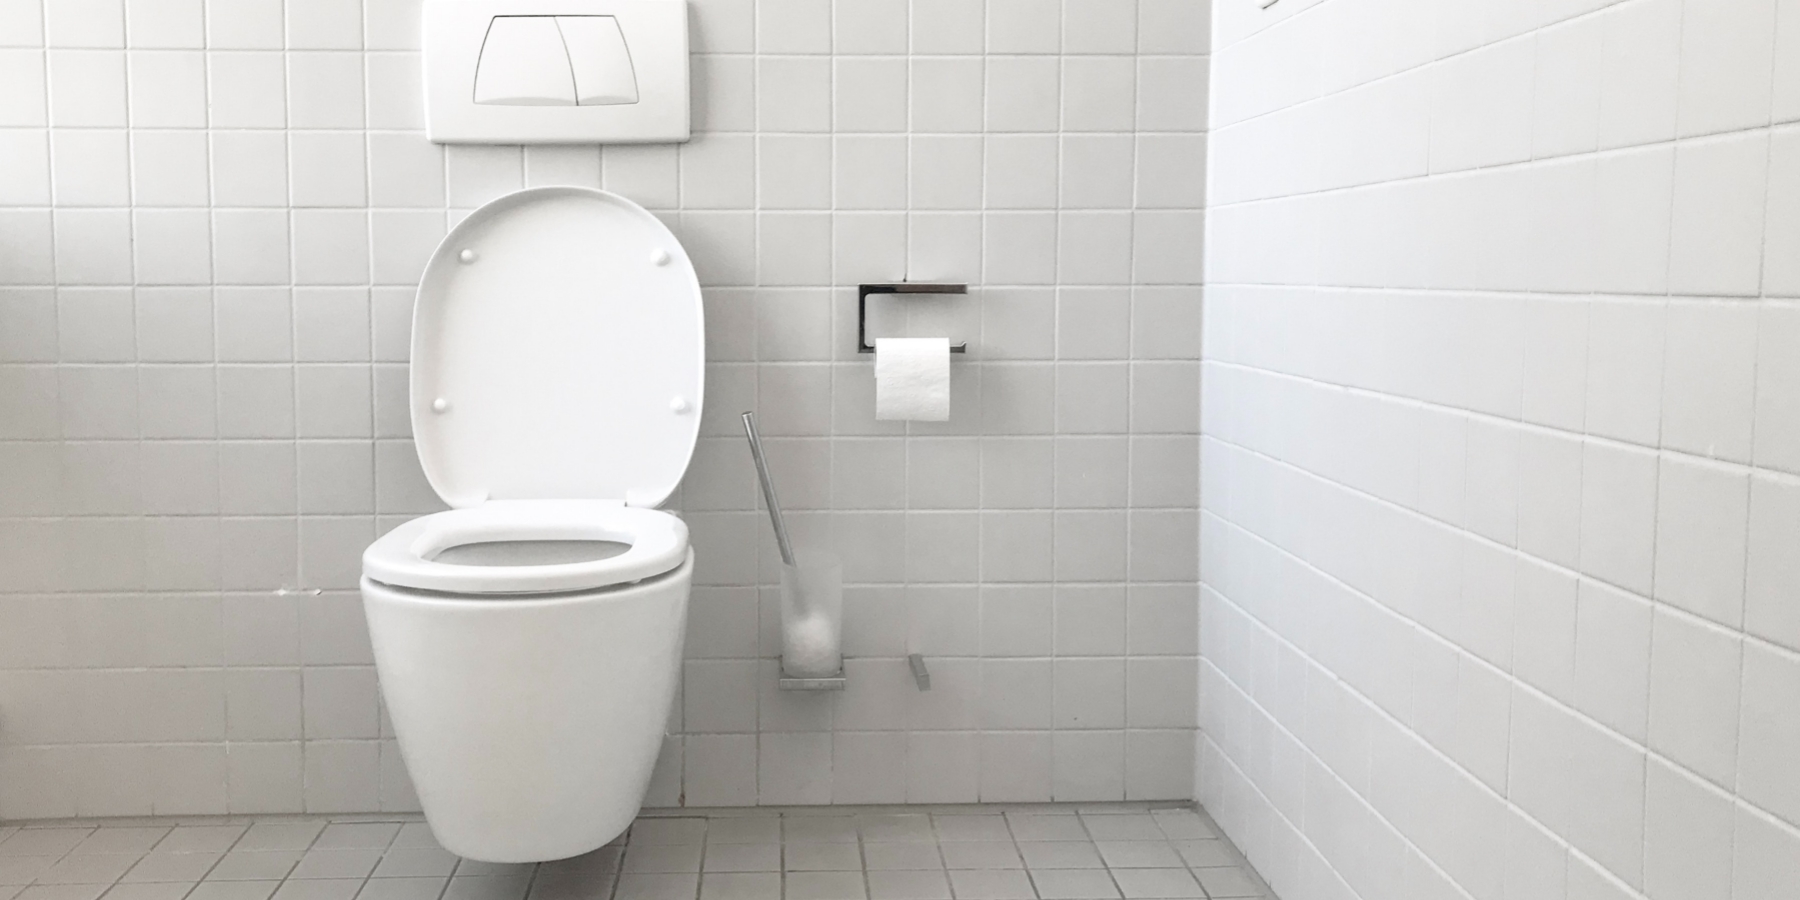 Understanding the Causes of Toilet Whistling